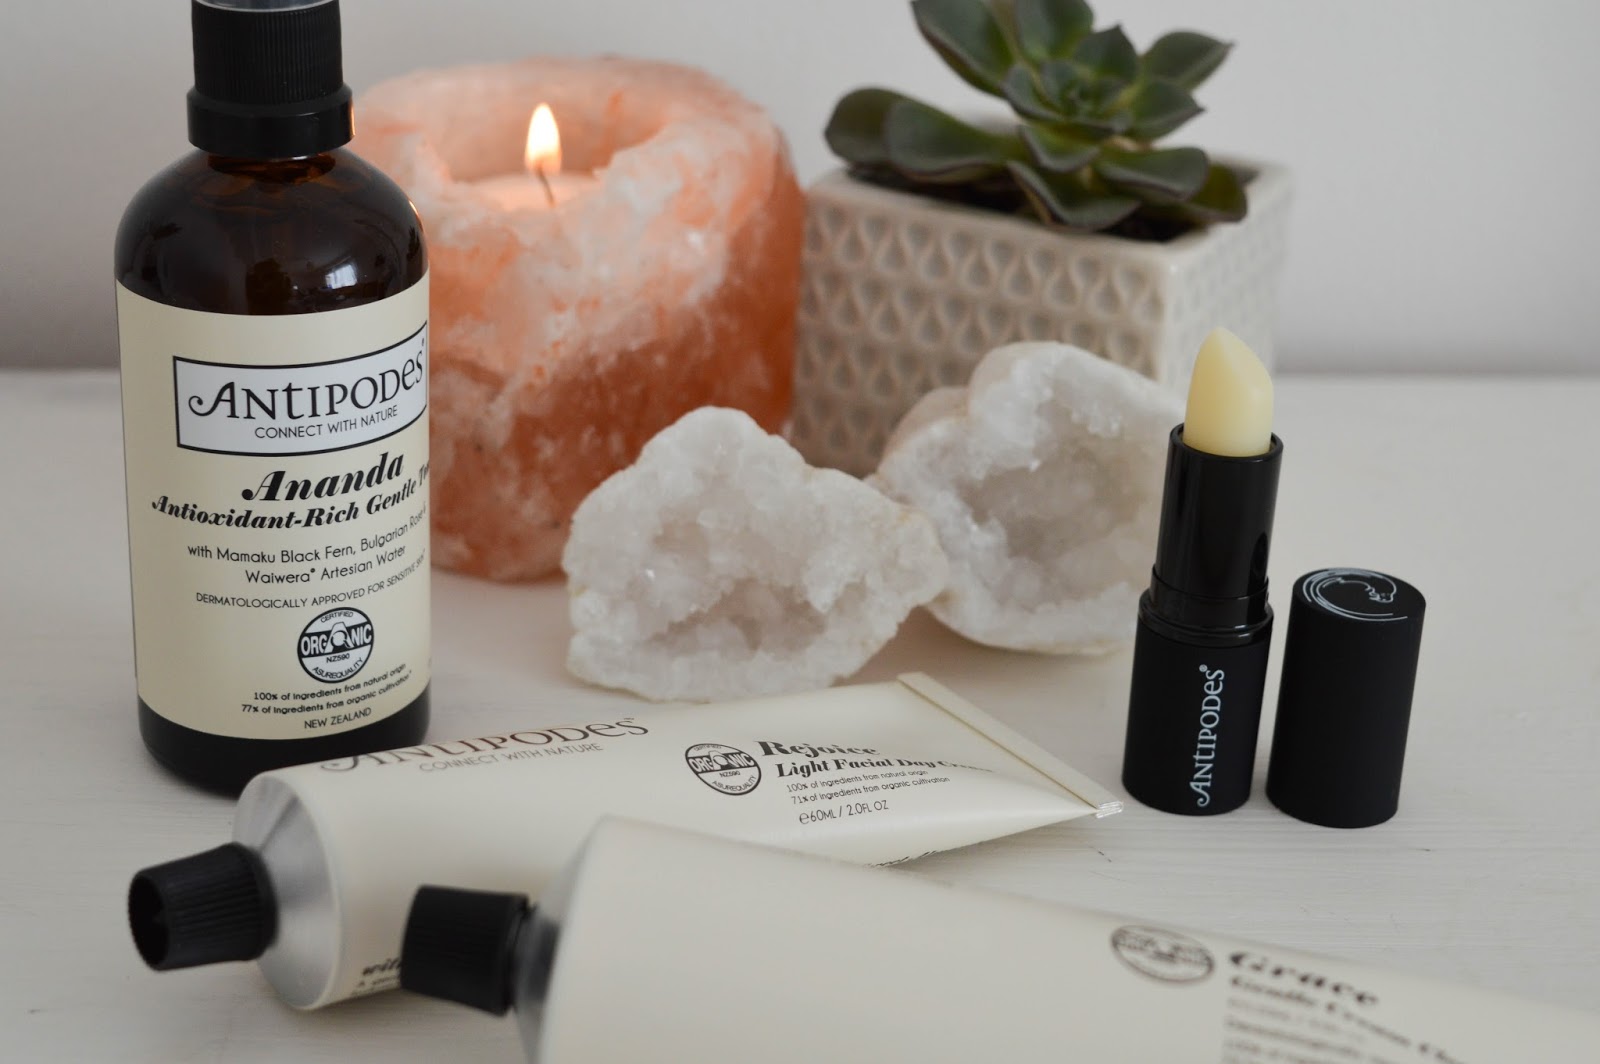 Organic September with Antipodes, Organic skincare, Antipodes review, beauty blog